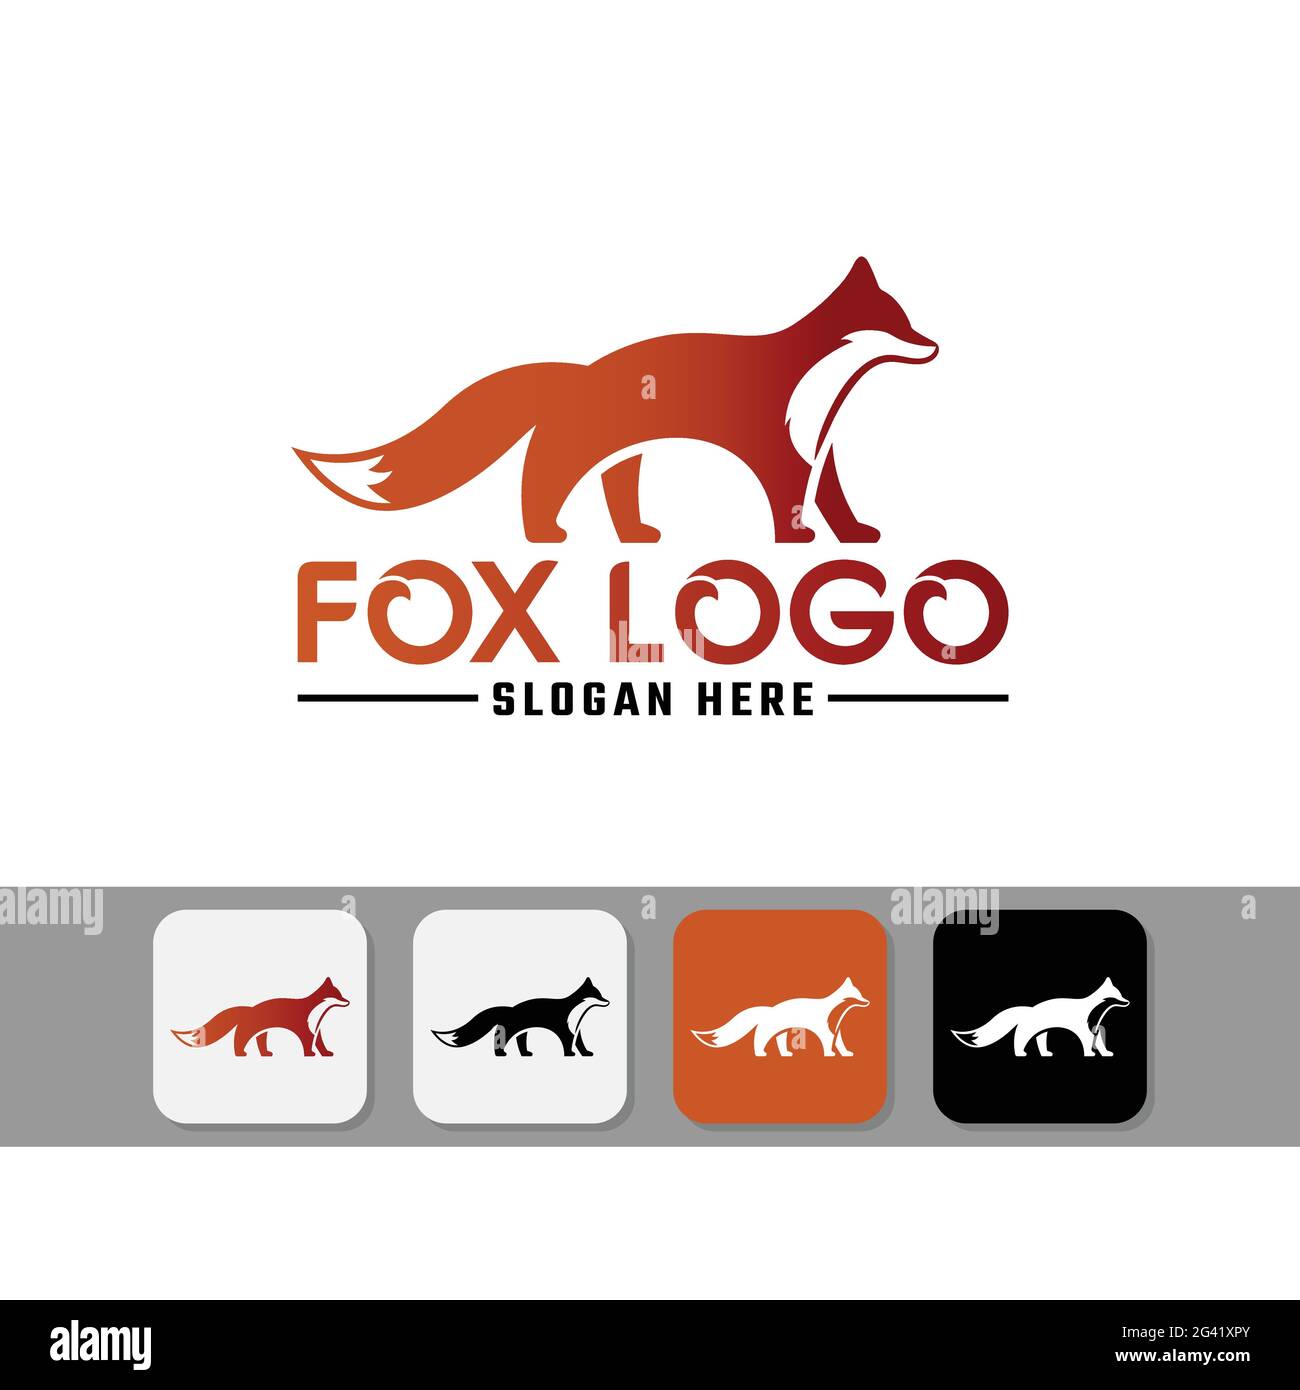 Modern Fox Silhouette in Orange Color Logo Design. Suitable to be used as a mascot for digital applications, brands, or company logos. Simple and flat Stock Vector